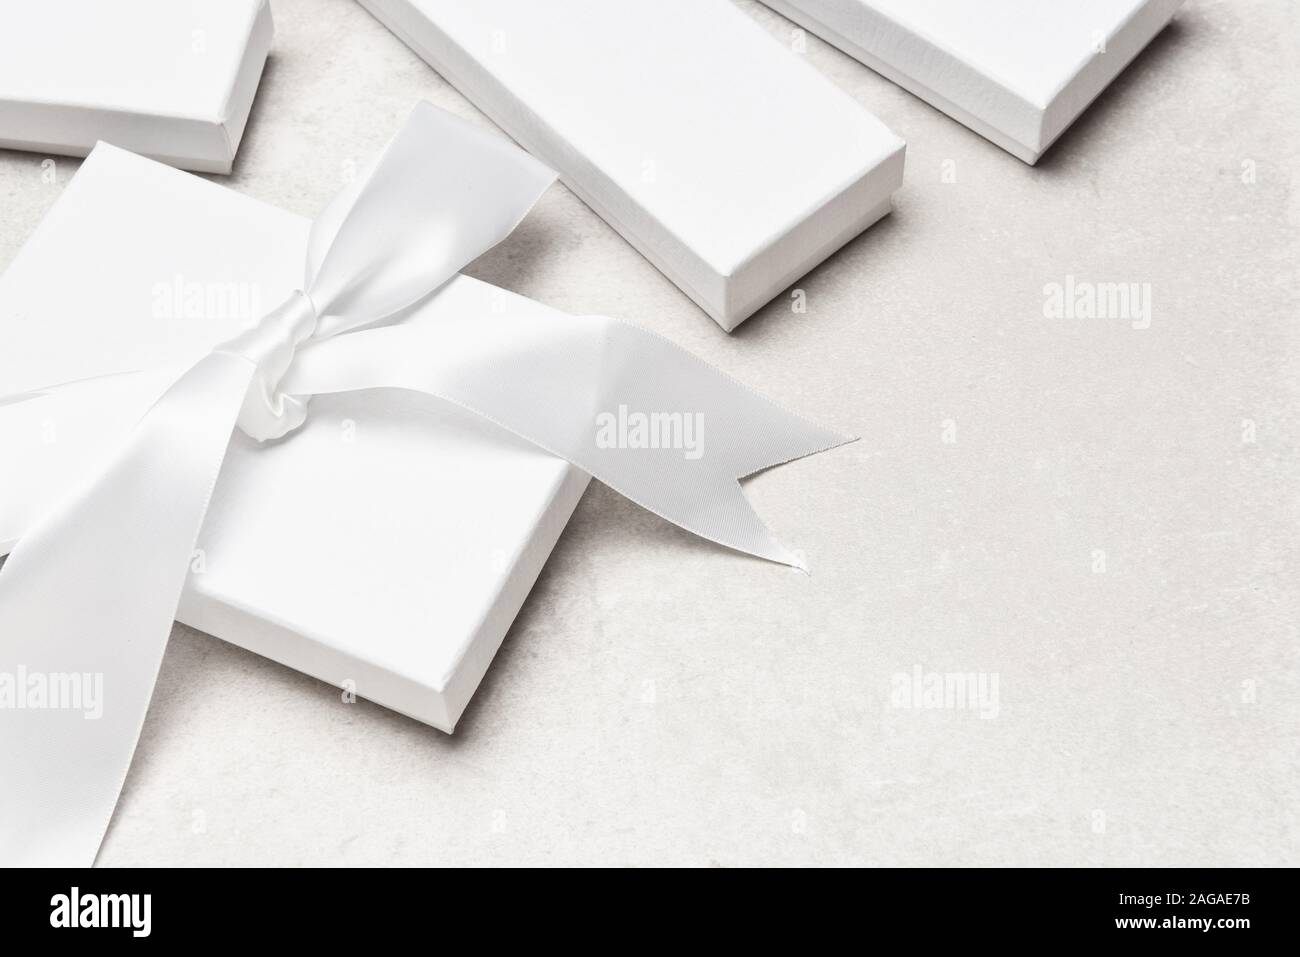 High angle shot of a group of white gift boxes on a light gray desk top. One box has a large white bow. Stock Photo